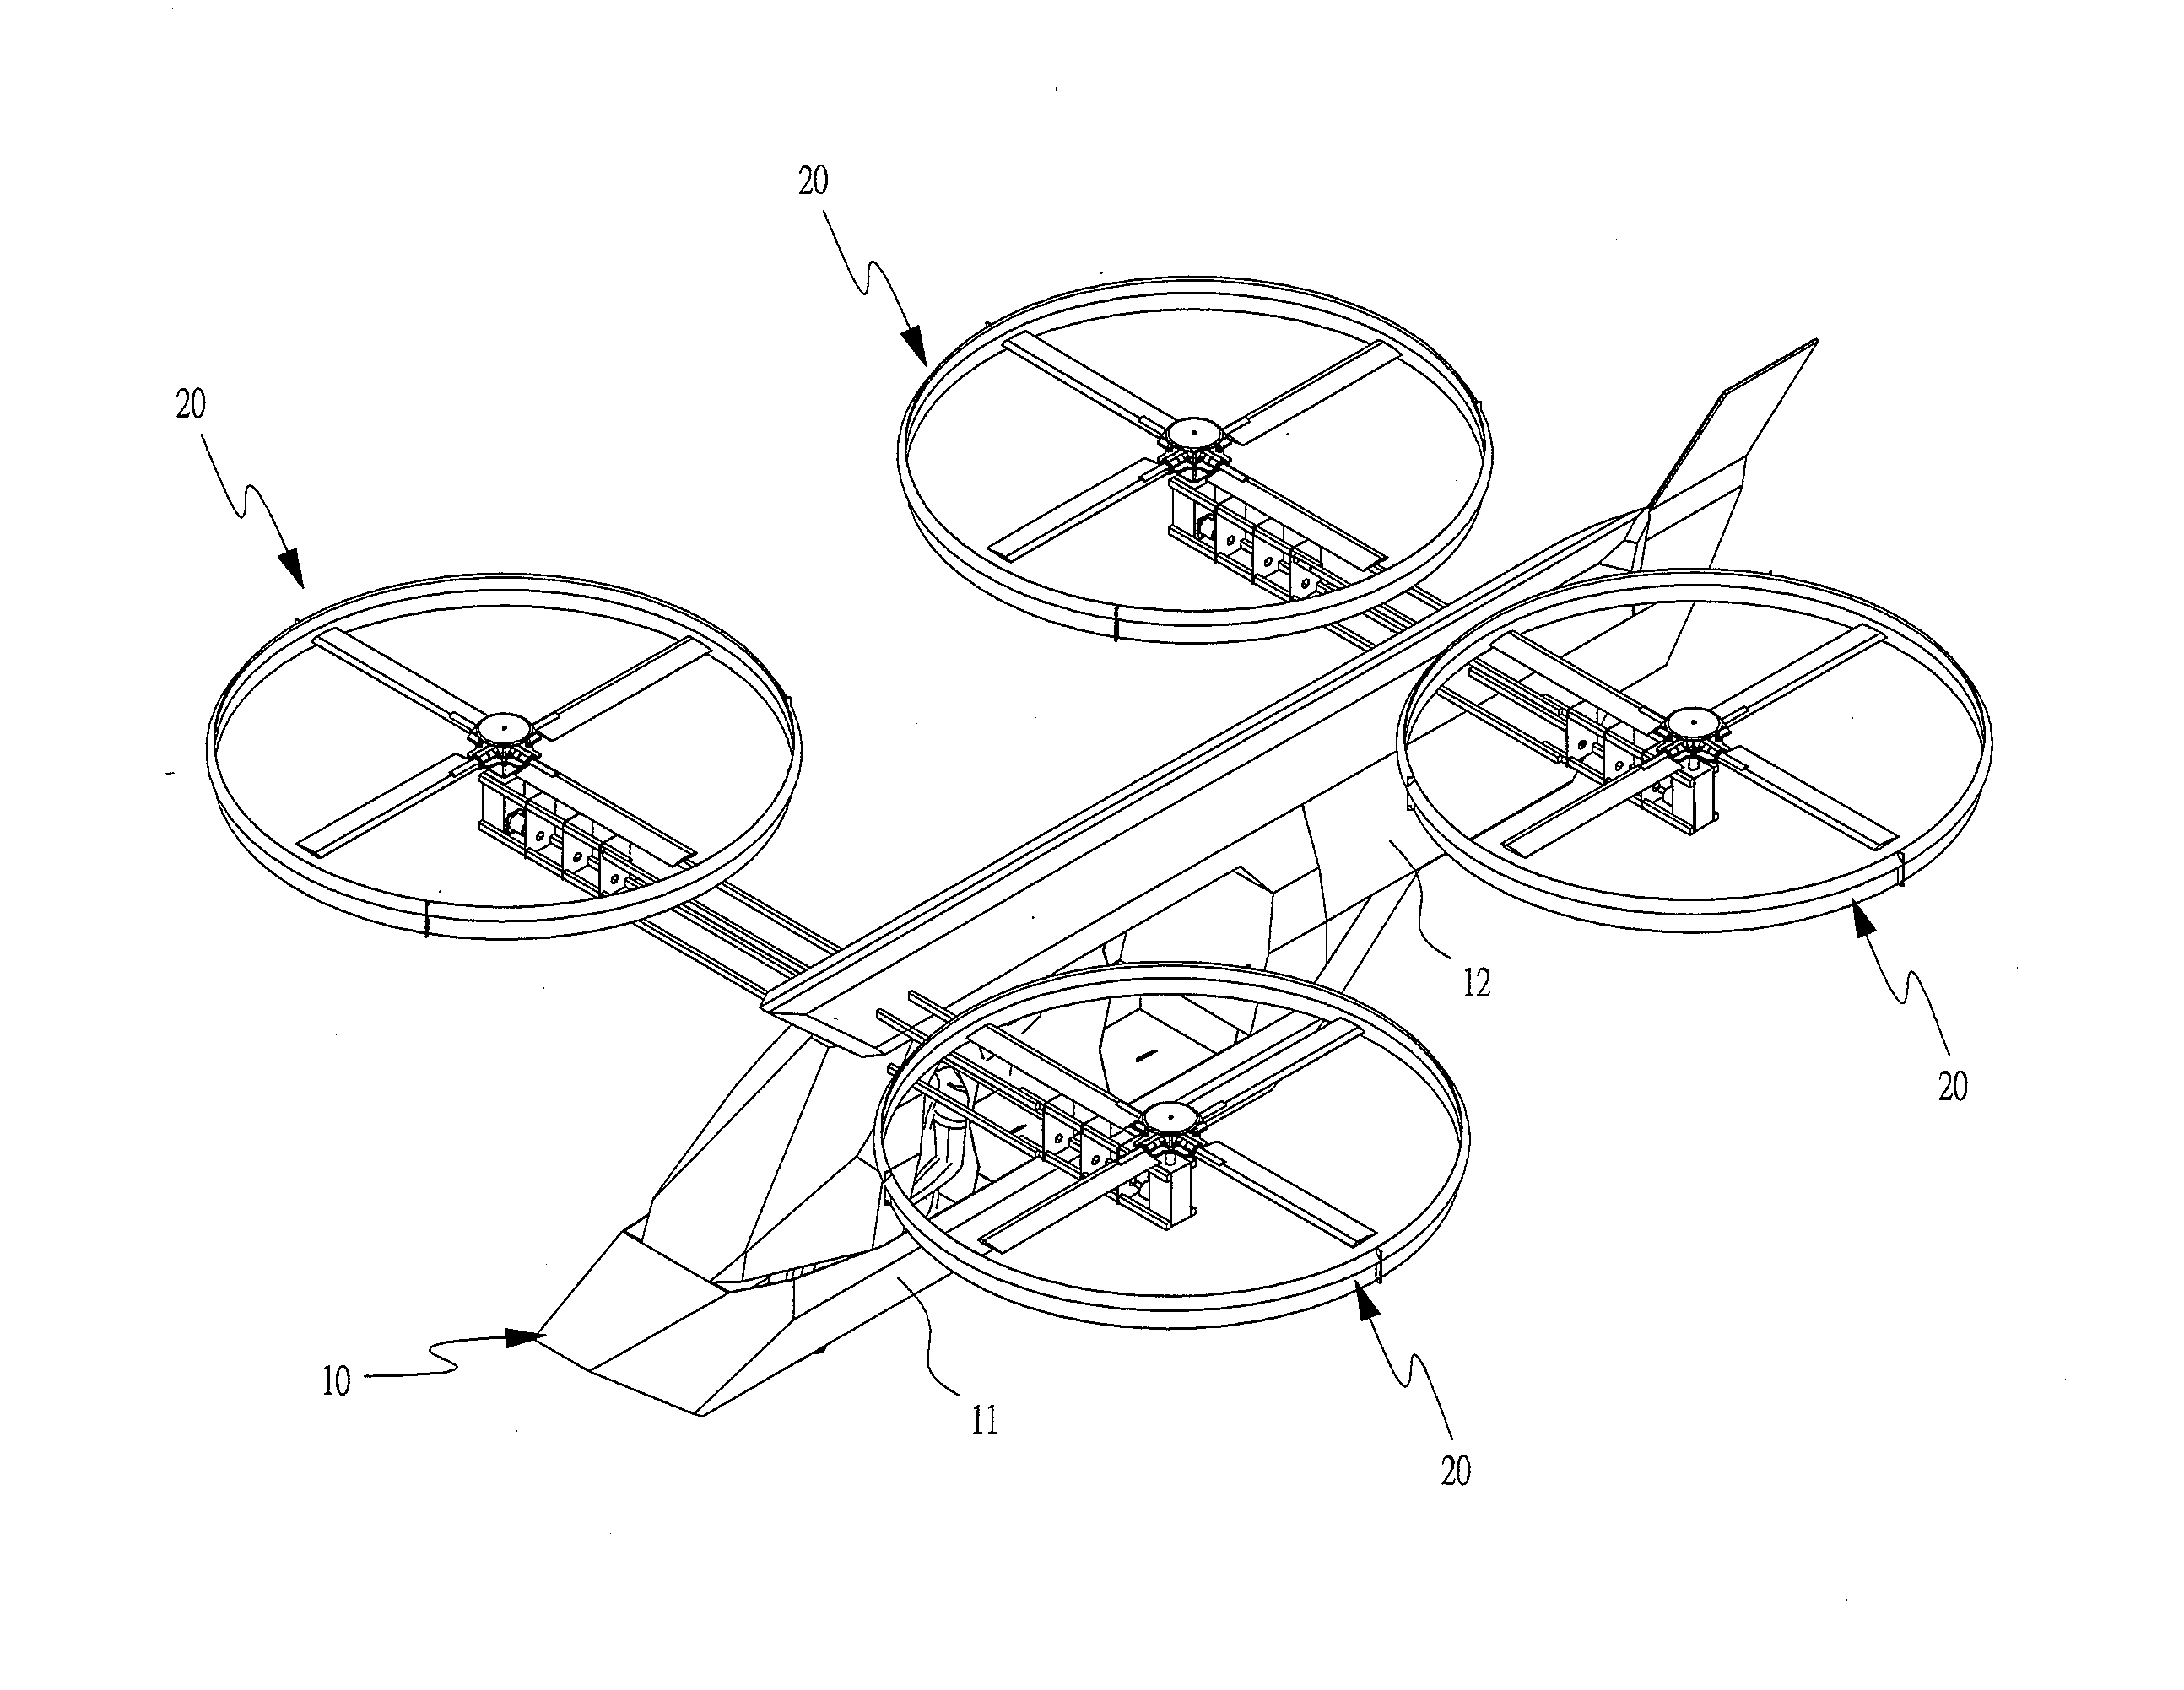 Helicopter with h-pattern structure